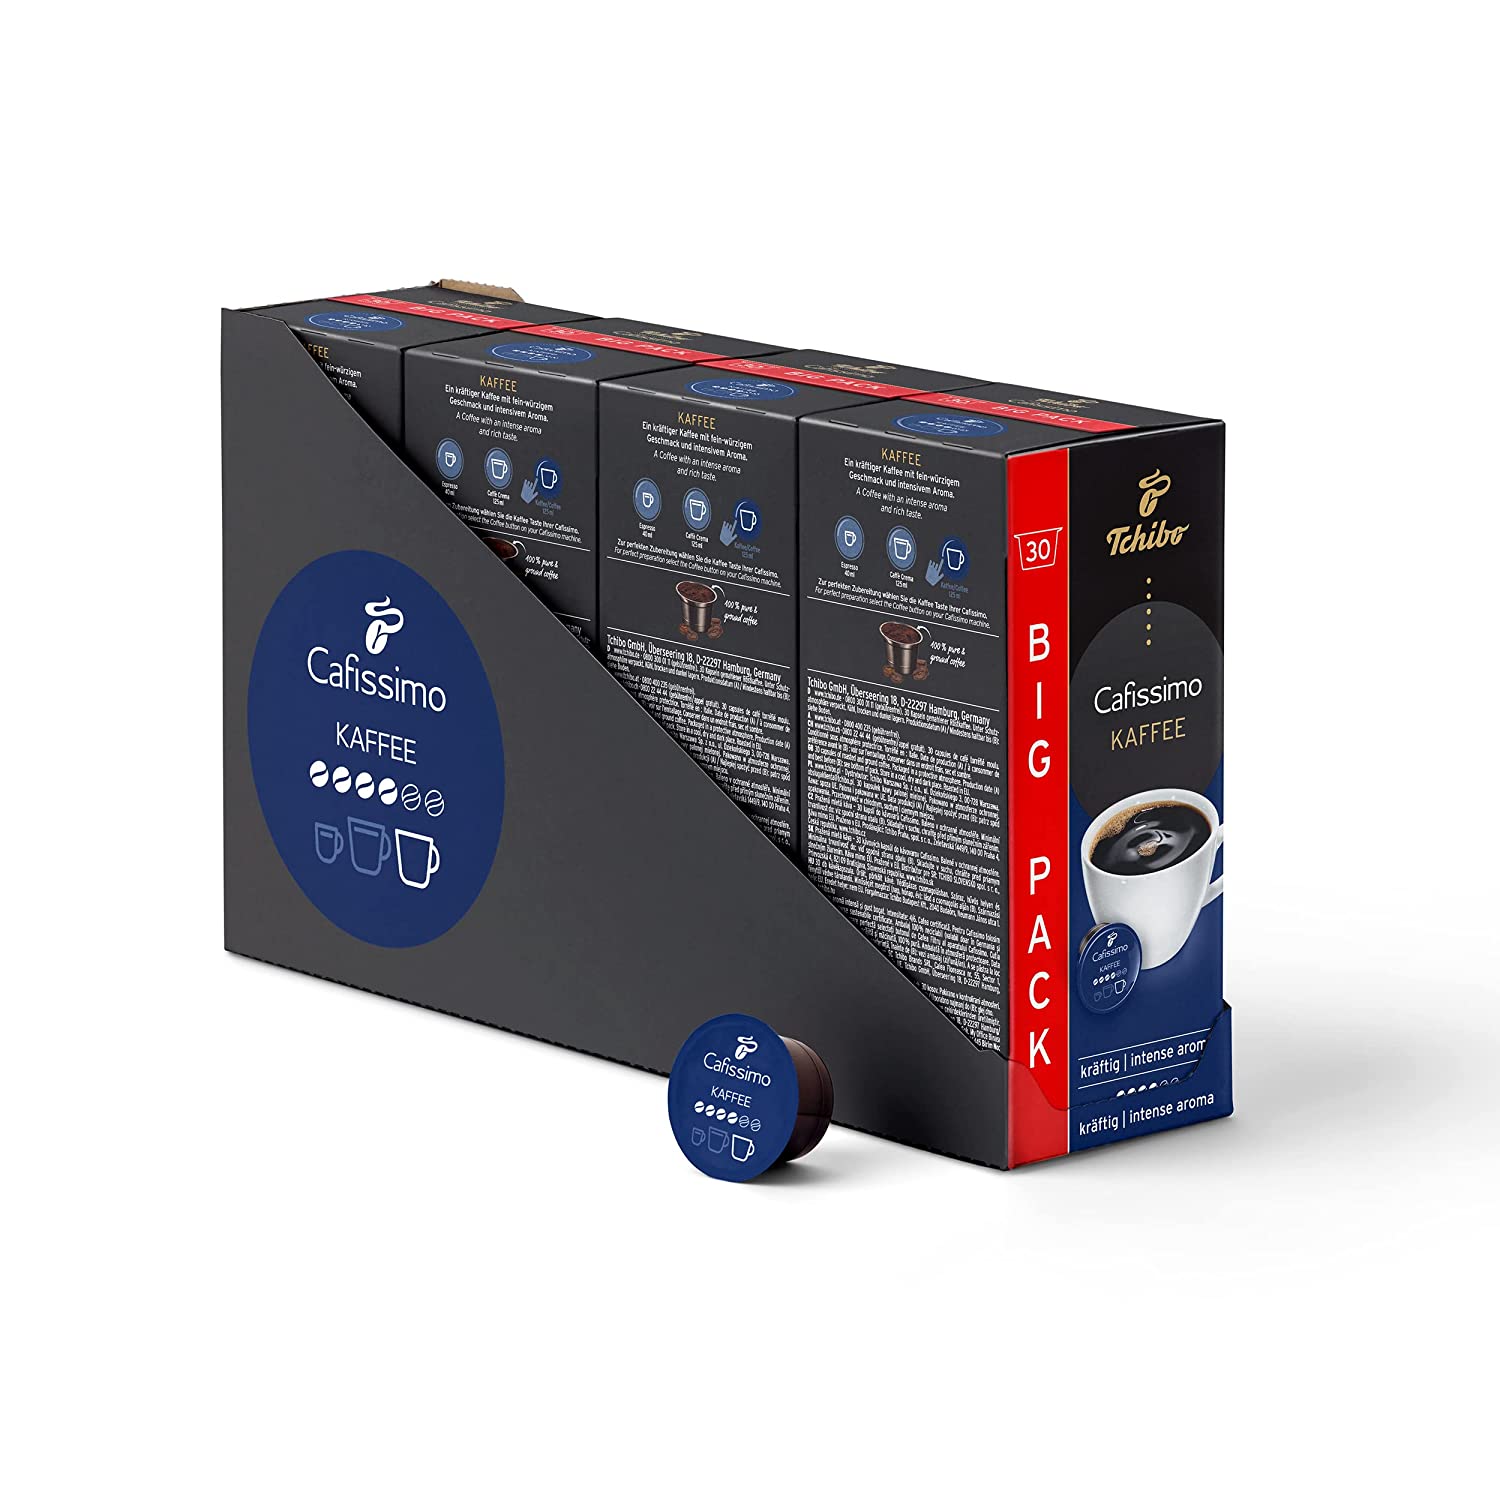 Tchibo cafissimo coffee strong coffee capsules, 120 pieces-4x30 capsules (coffee, intensive and fine-spicy aroma), sustainable & fair trade